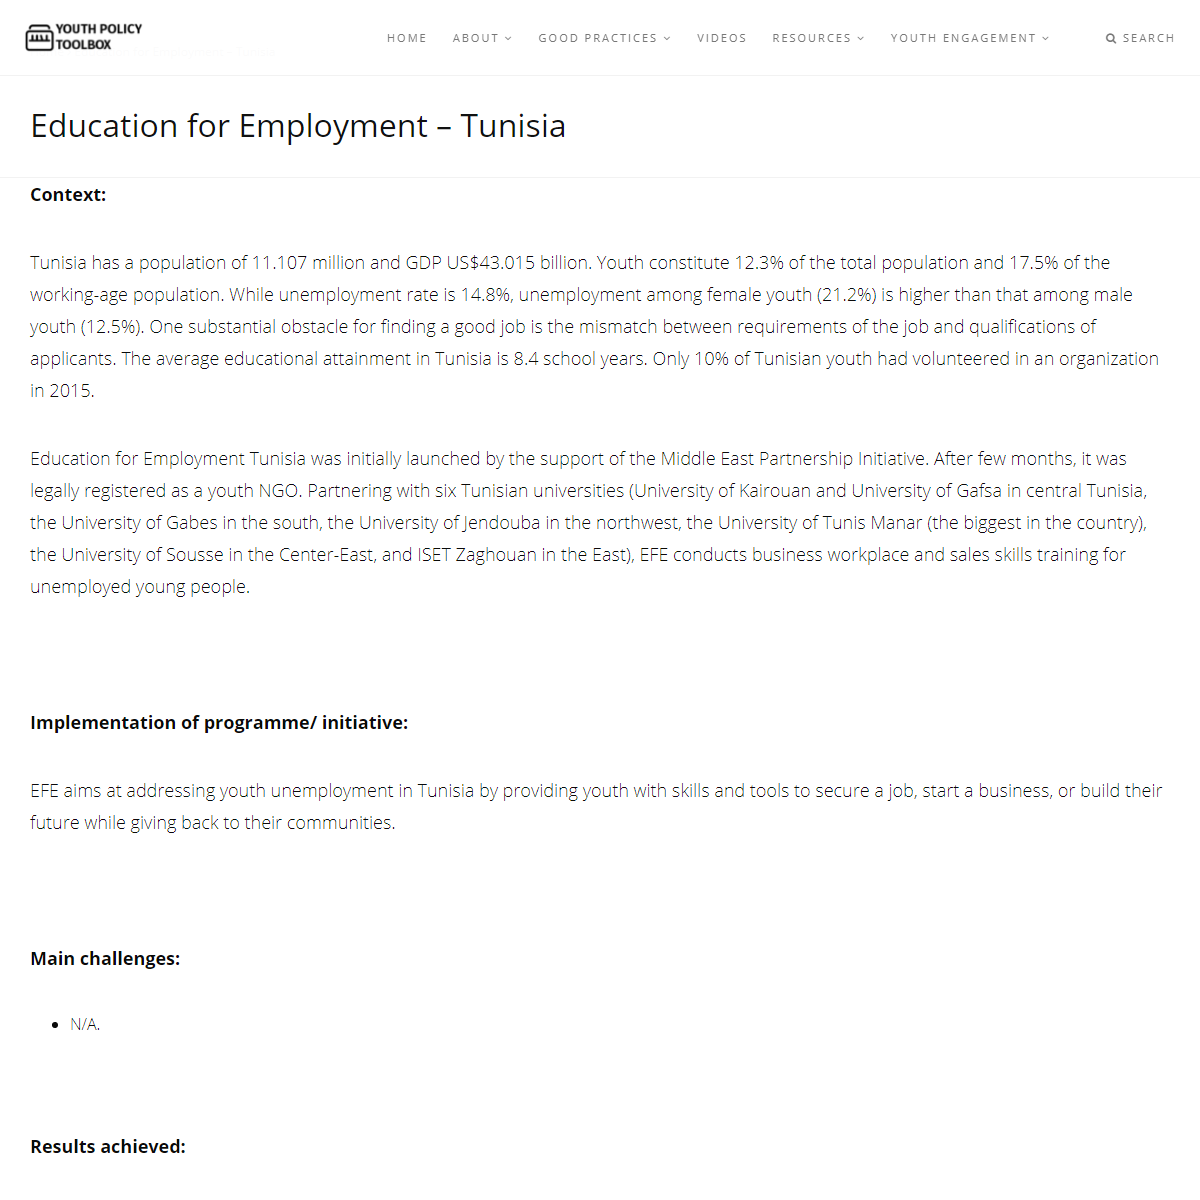 A complete backup of https://yptoolbox.unescapsdd.org/portfolio/education-employment-tunisia/